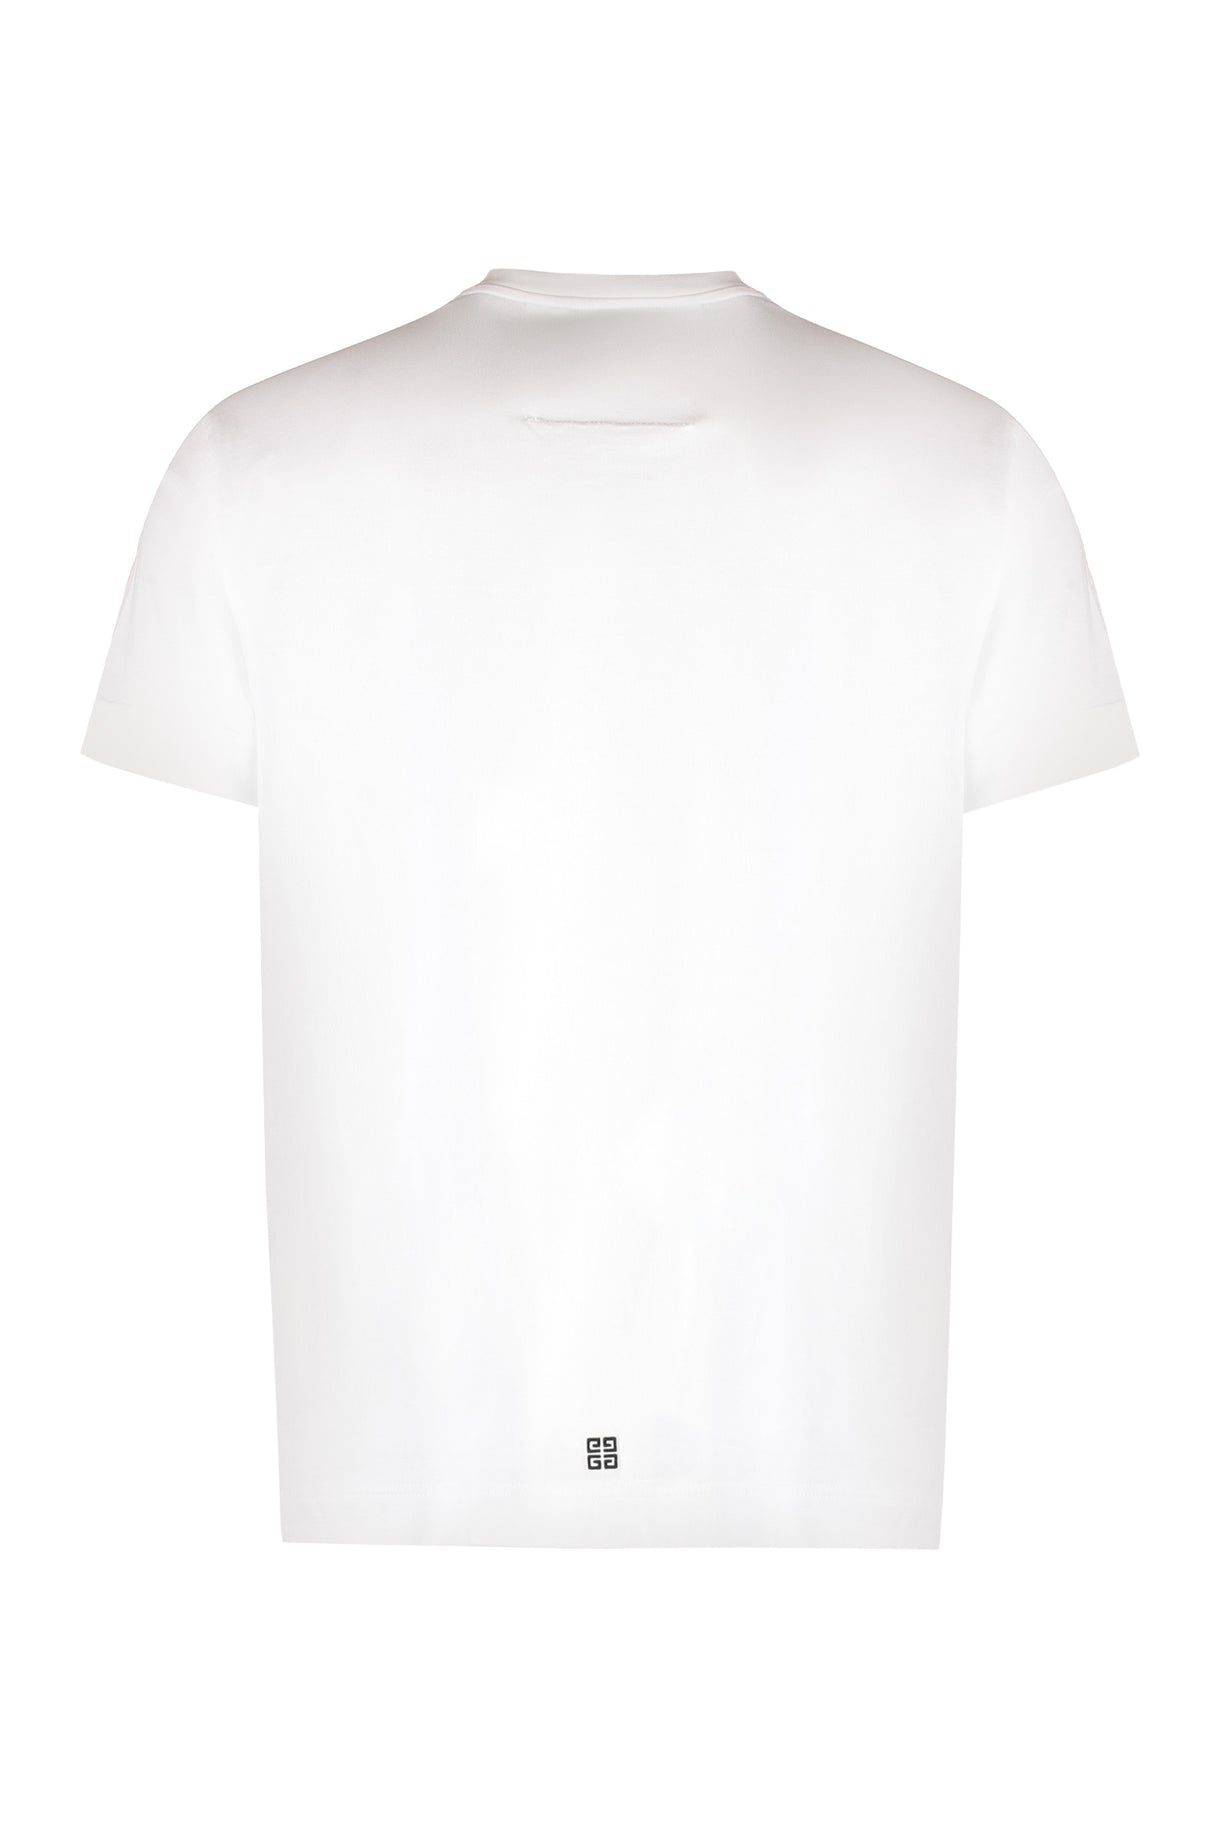 GIVENCHY Classic White Cotton T-Shirt for Men